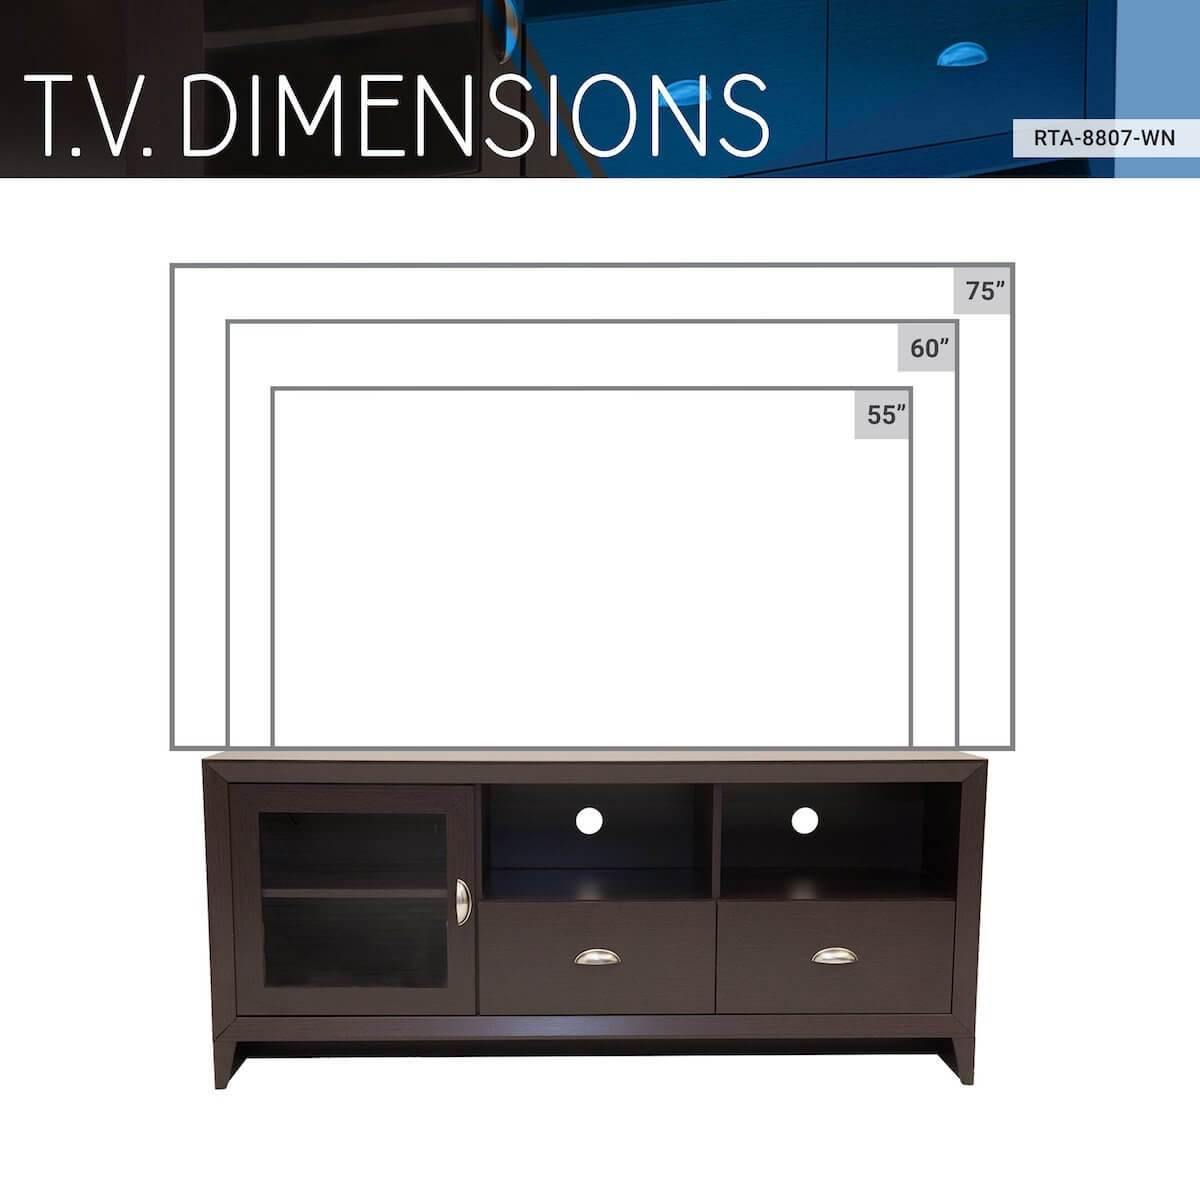 Techni Mobili Wenge Modern TV Stand with Storage for TVs Up To 60" RTA-8807-WN TV Dimensions